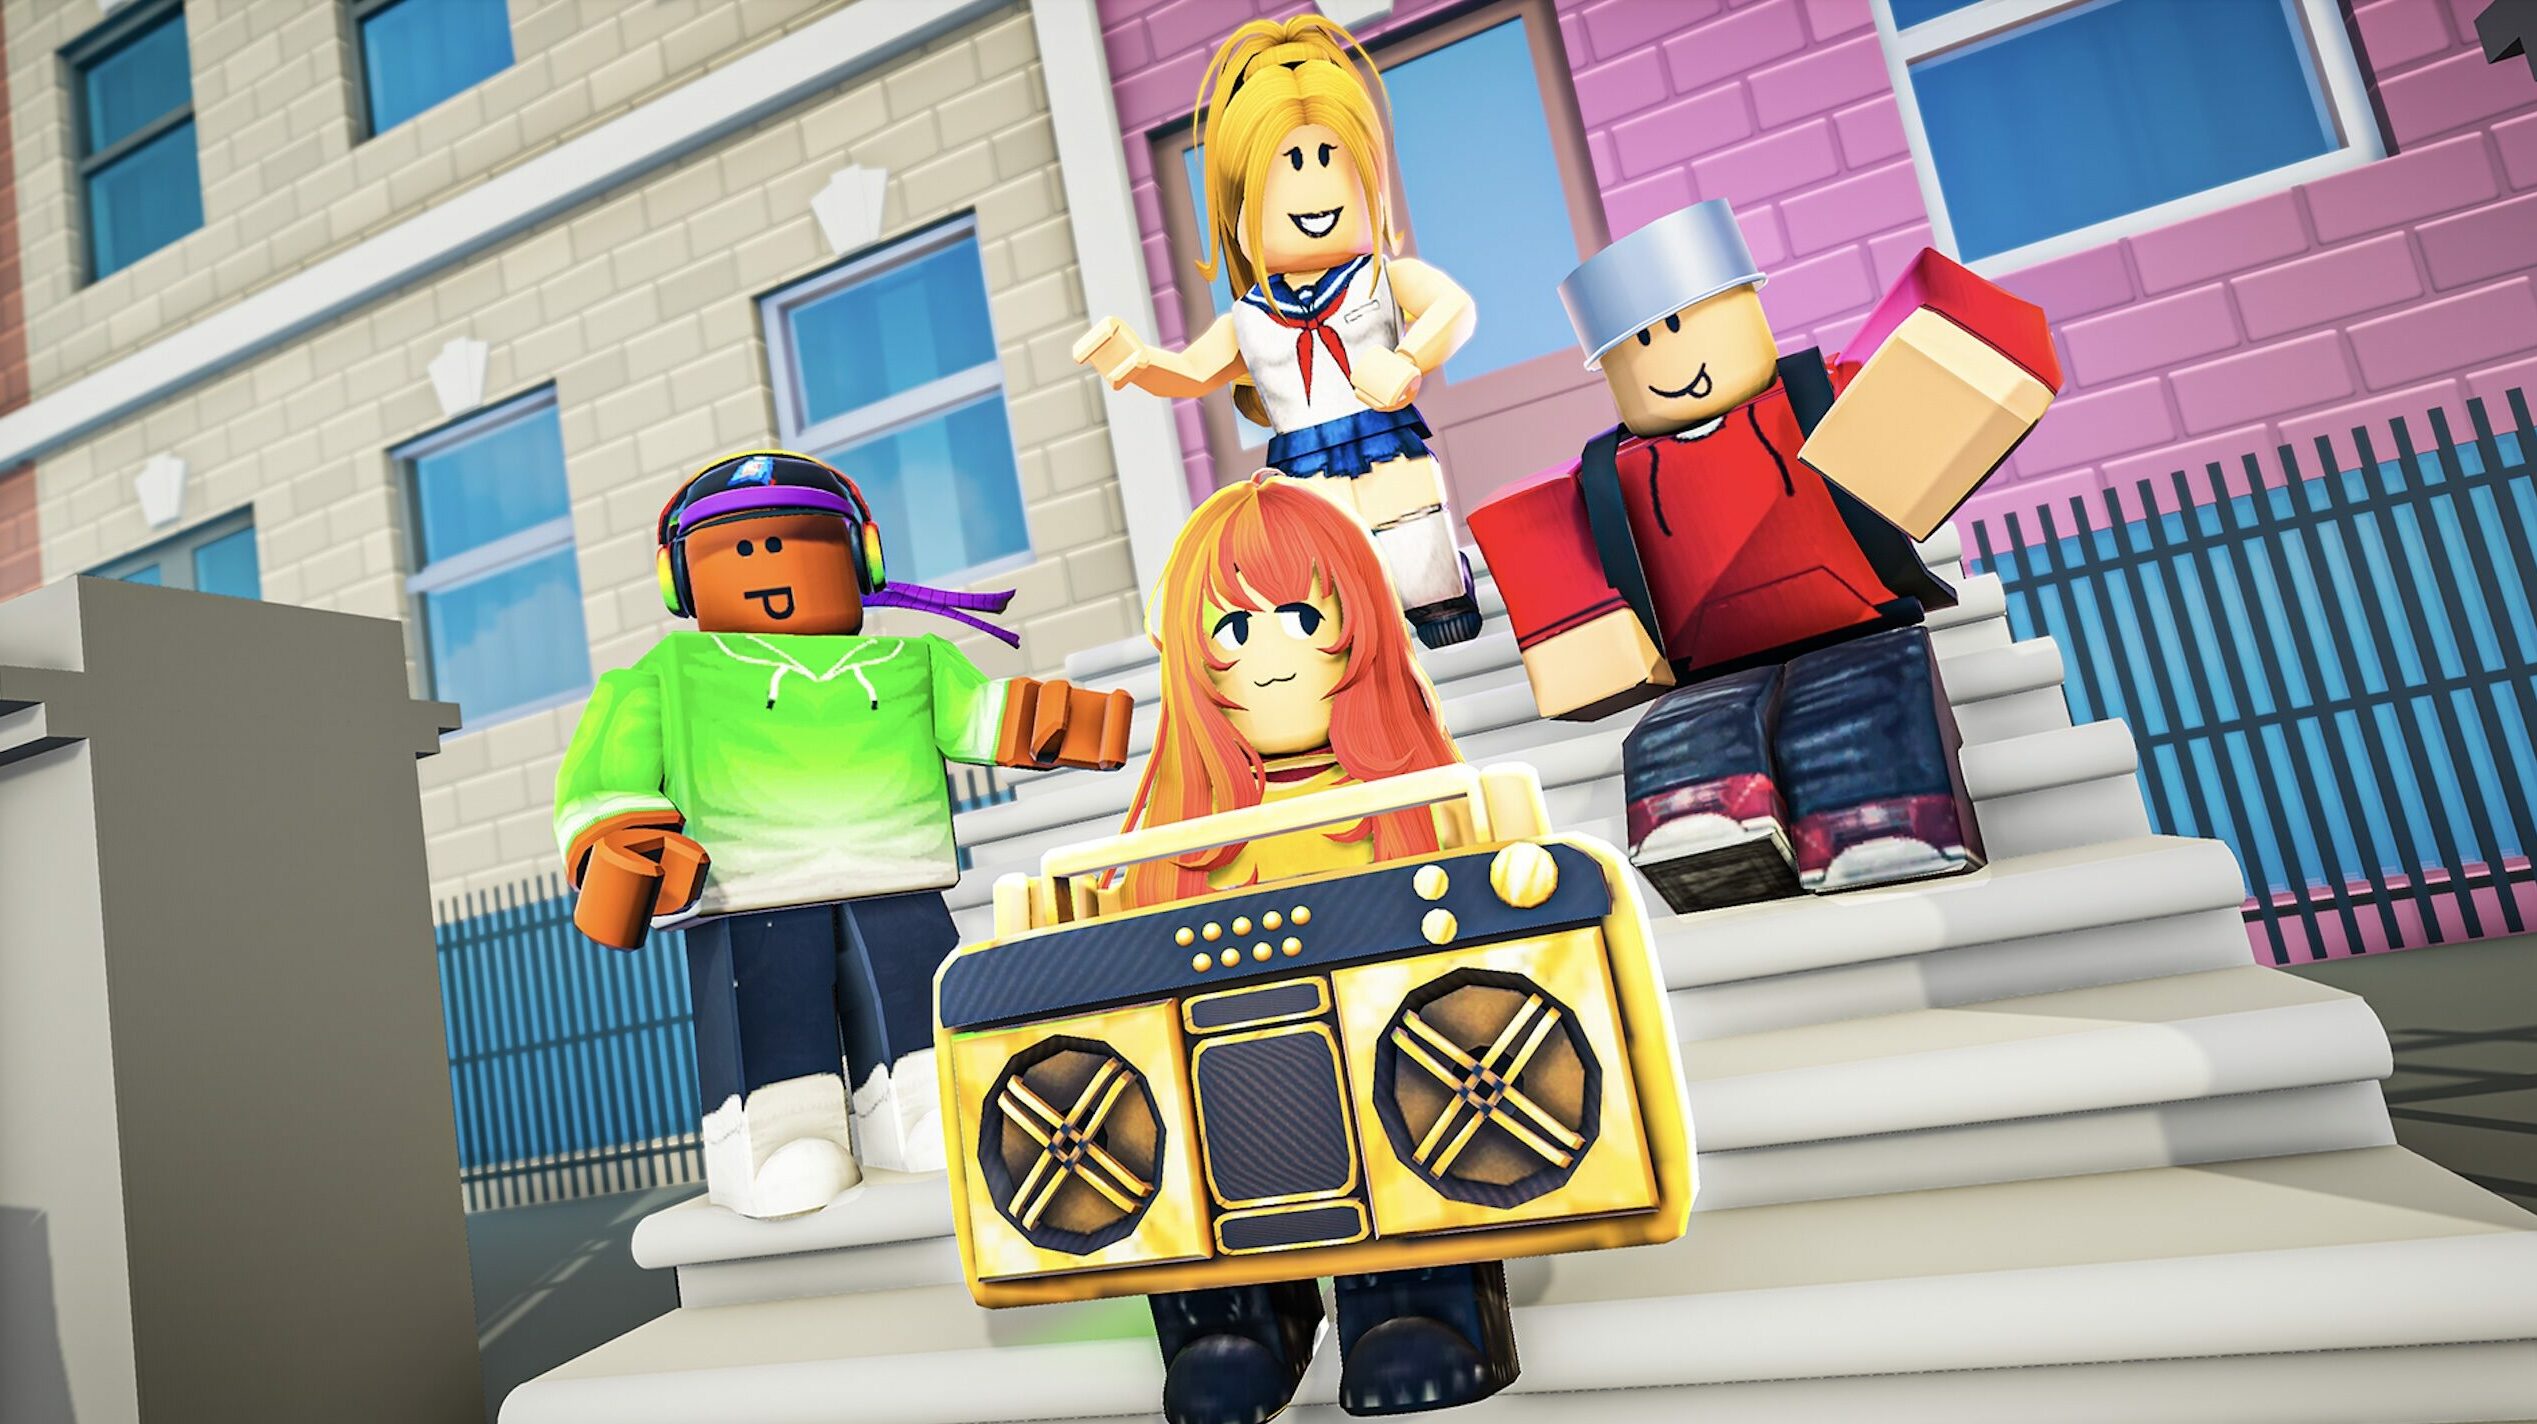 WMG and Roblox talk music, games and 'hyper reality metaverses